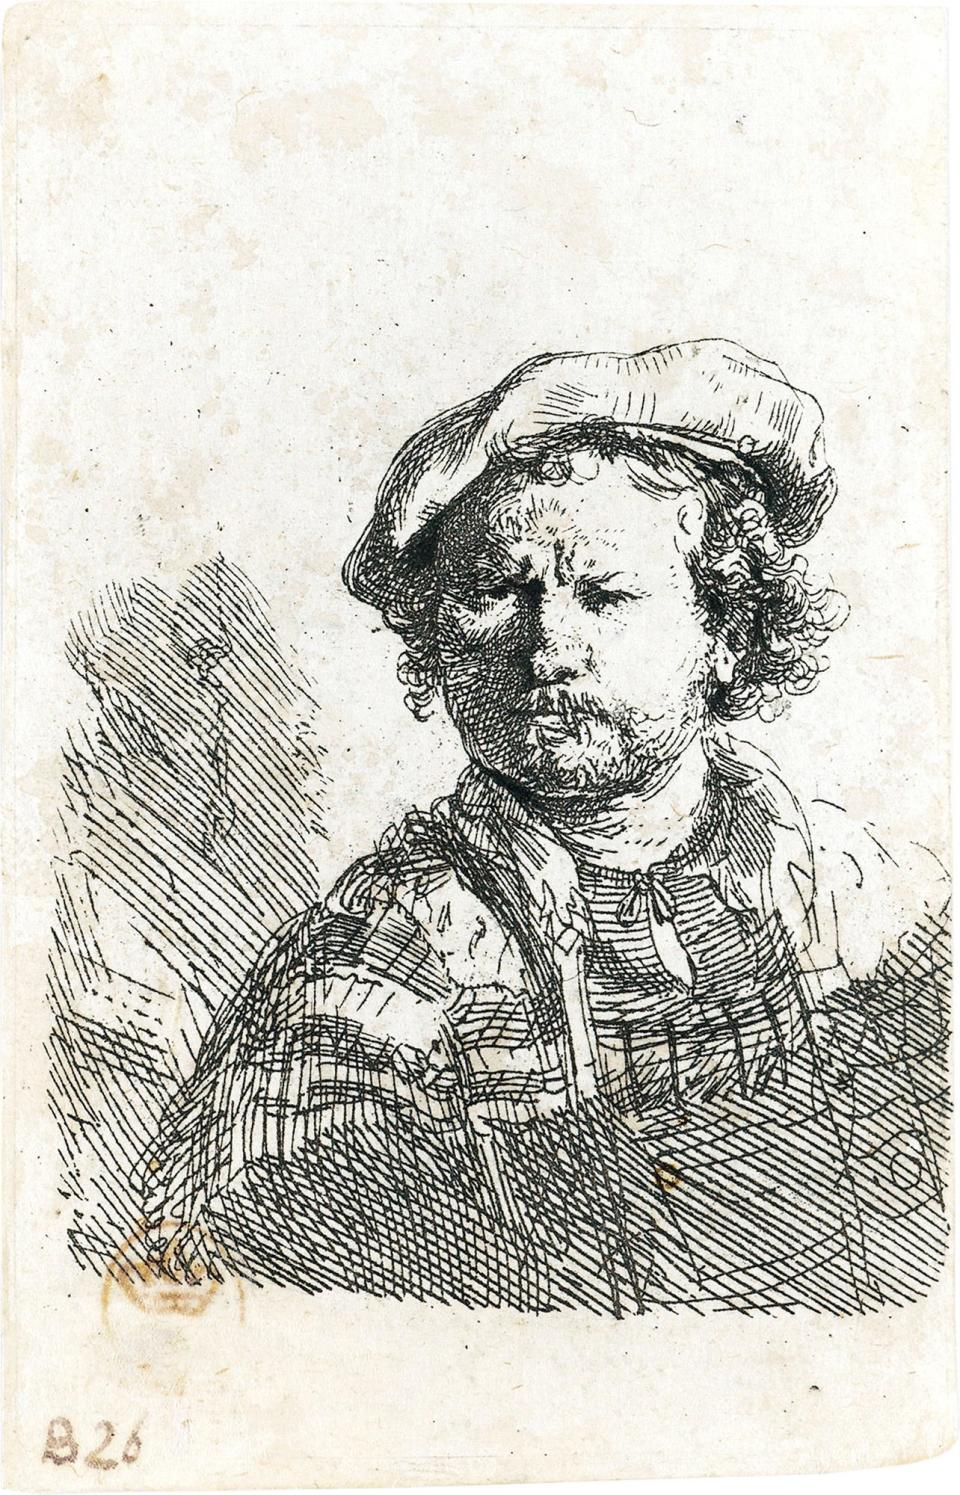 This is the etching, "Self Portrait in a Flat Cap and Embroidered Dress," by Rembrandt circa 1642.